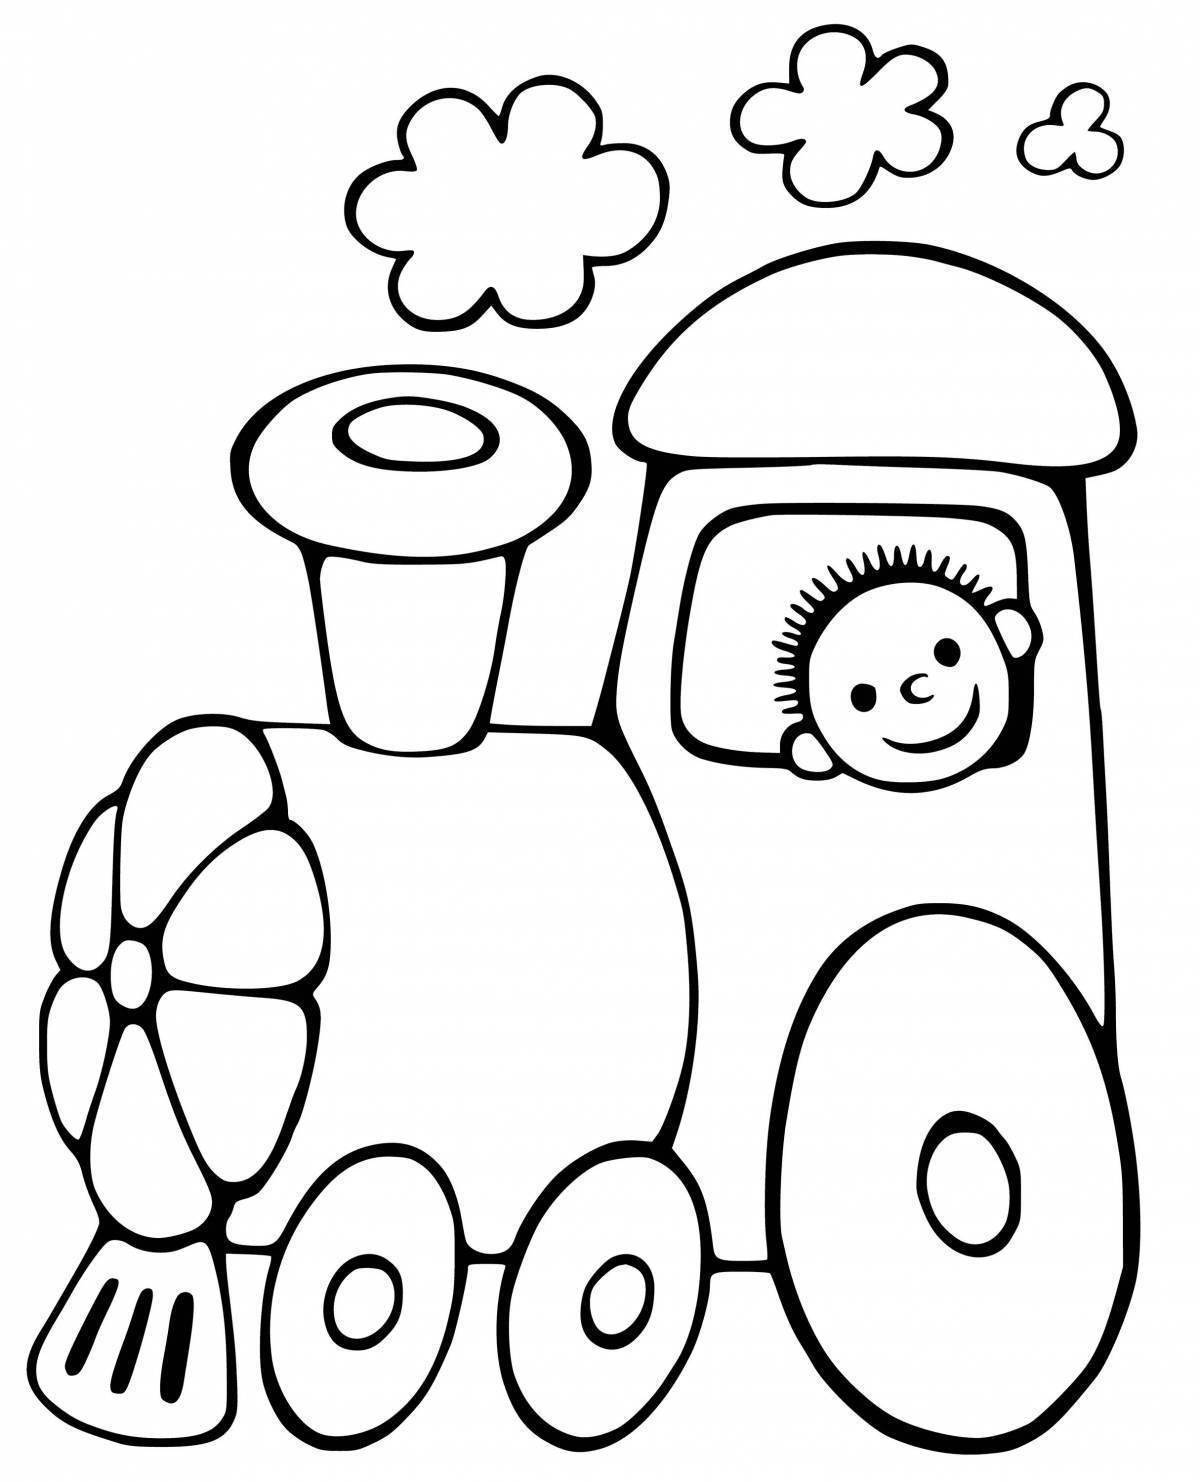 Amazing train coloring book for kids